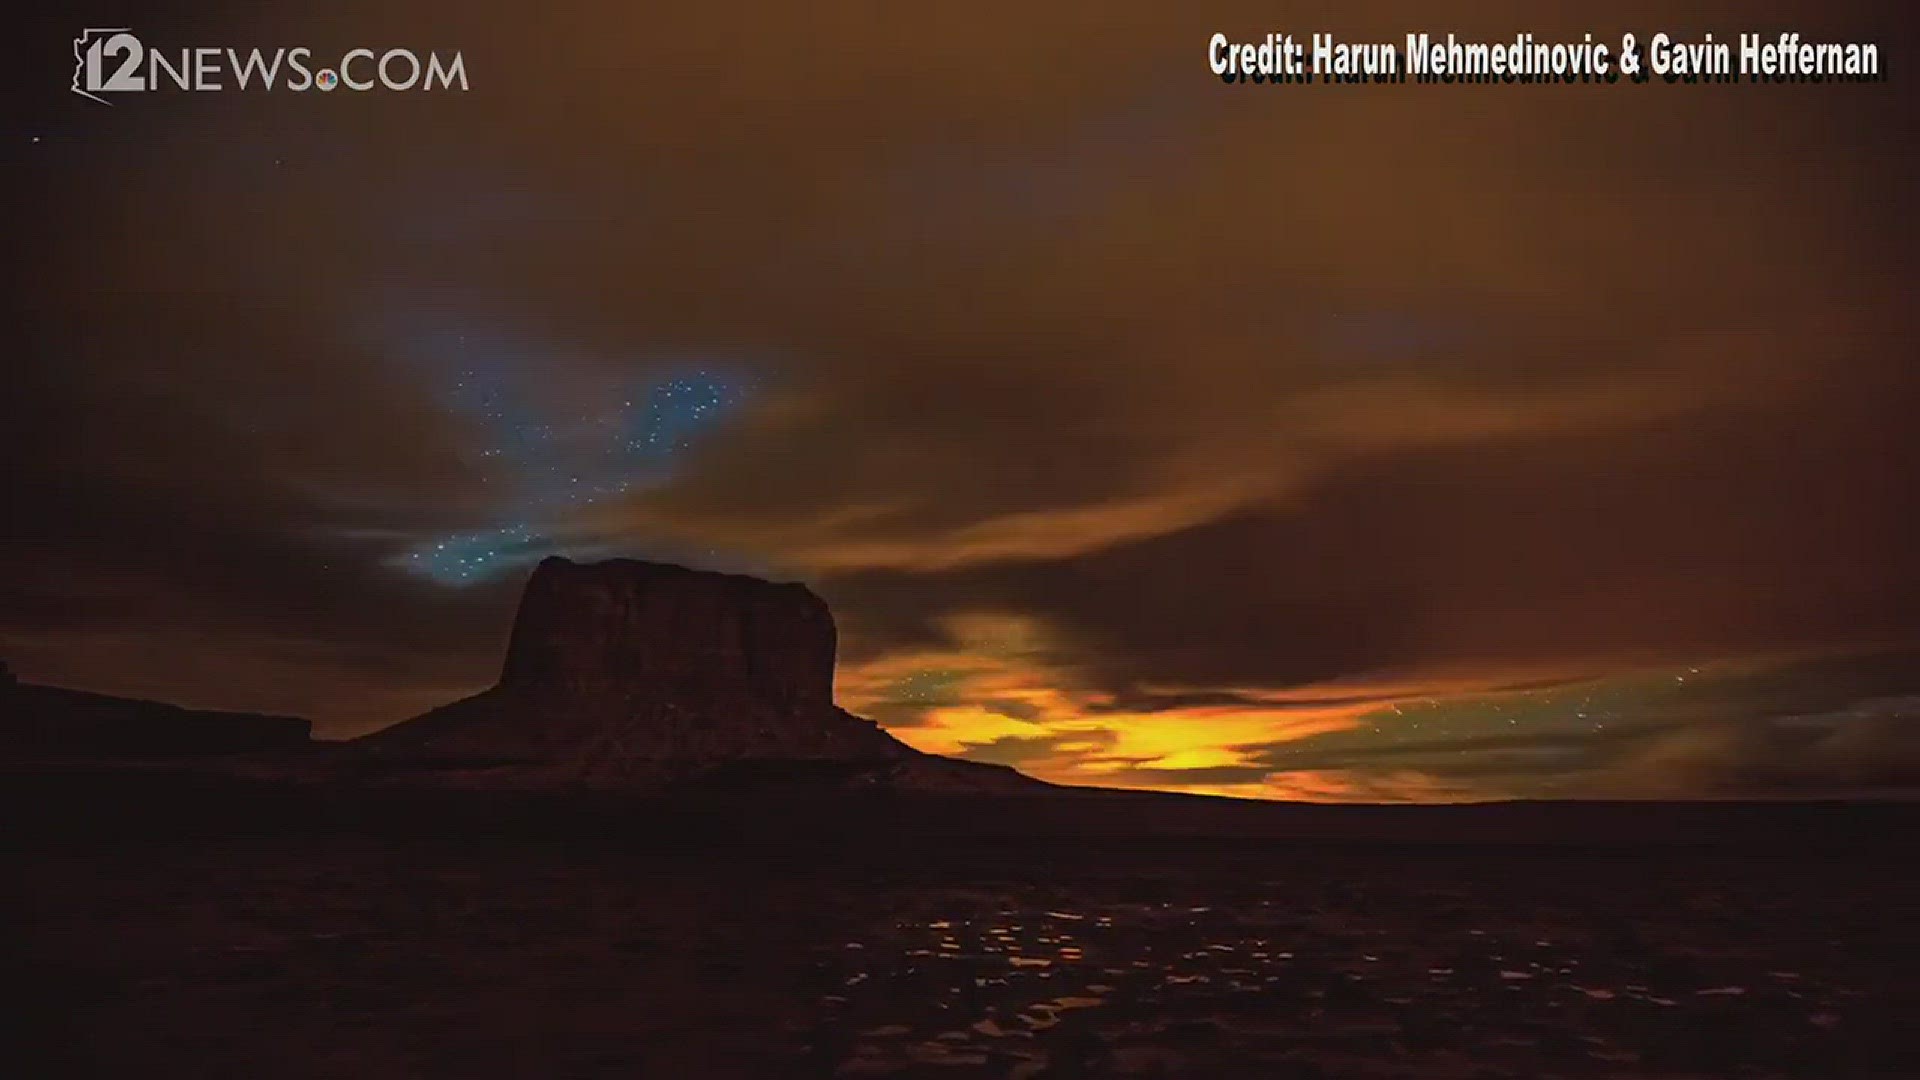 Timelapse of the night sky over Grand Canyon National Park and Monument Valley Navajo Tribal Park. (Credit: Harun Mehmedinovic and Gavin Heffernan)